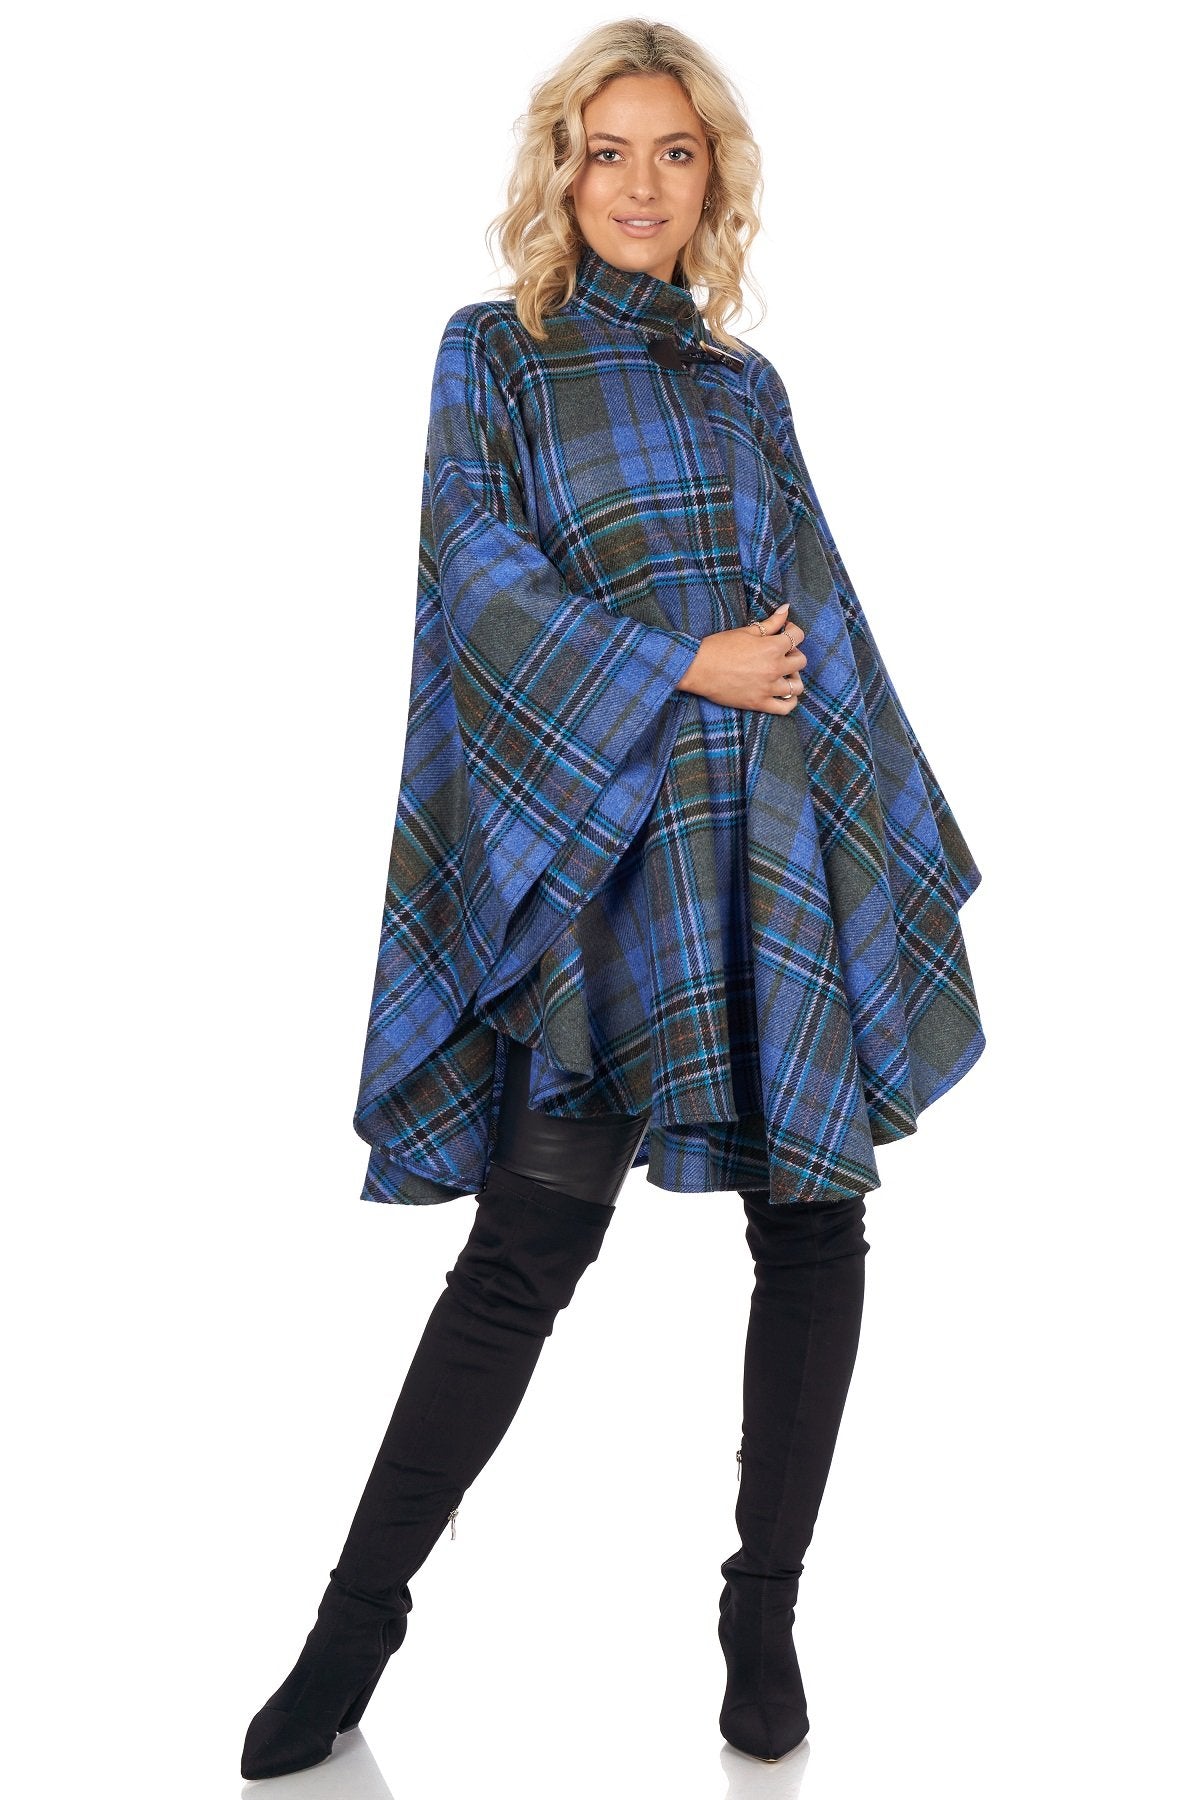 Women's blue and grey plaid cape with mandarin collar and toggle fastening by Jimmy Hourihan, Dublin, Ireland